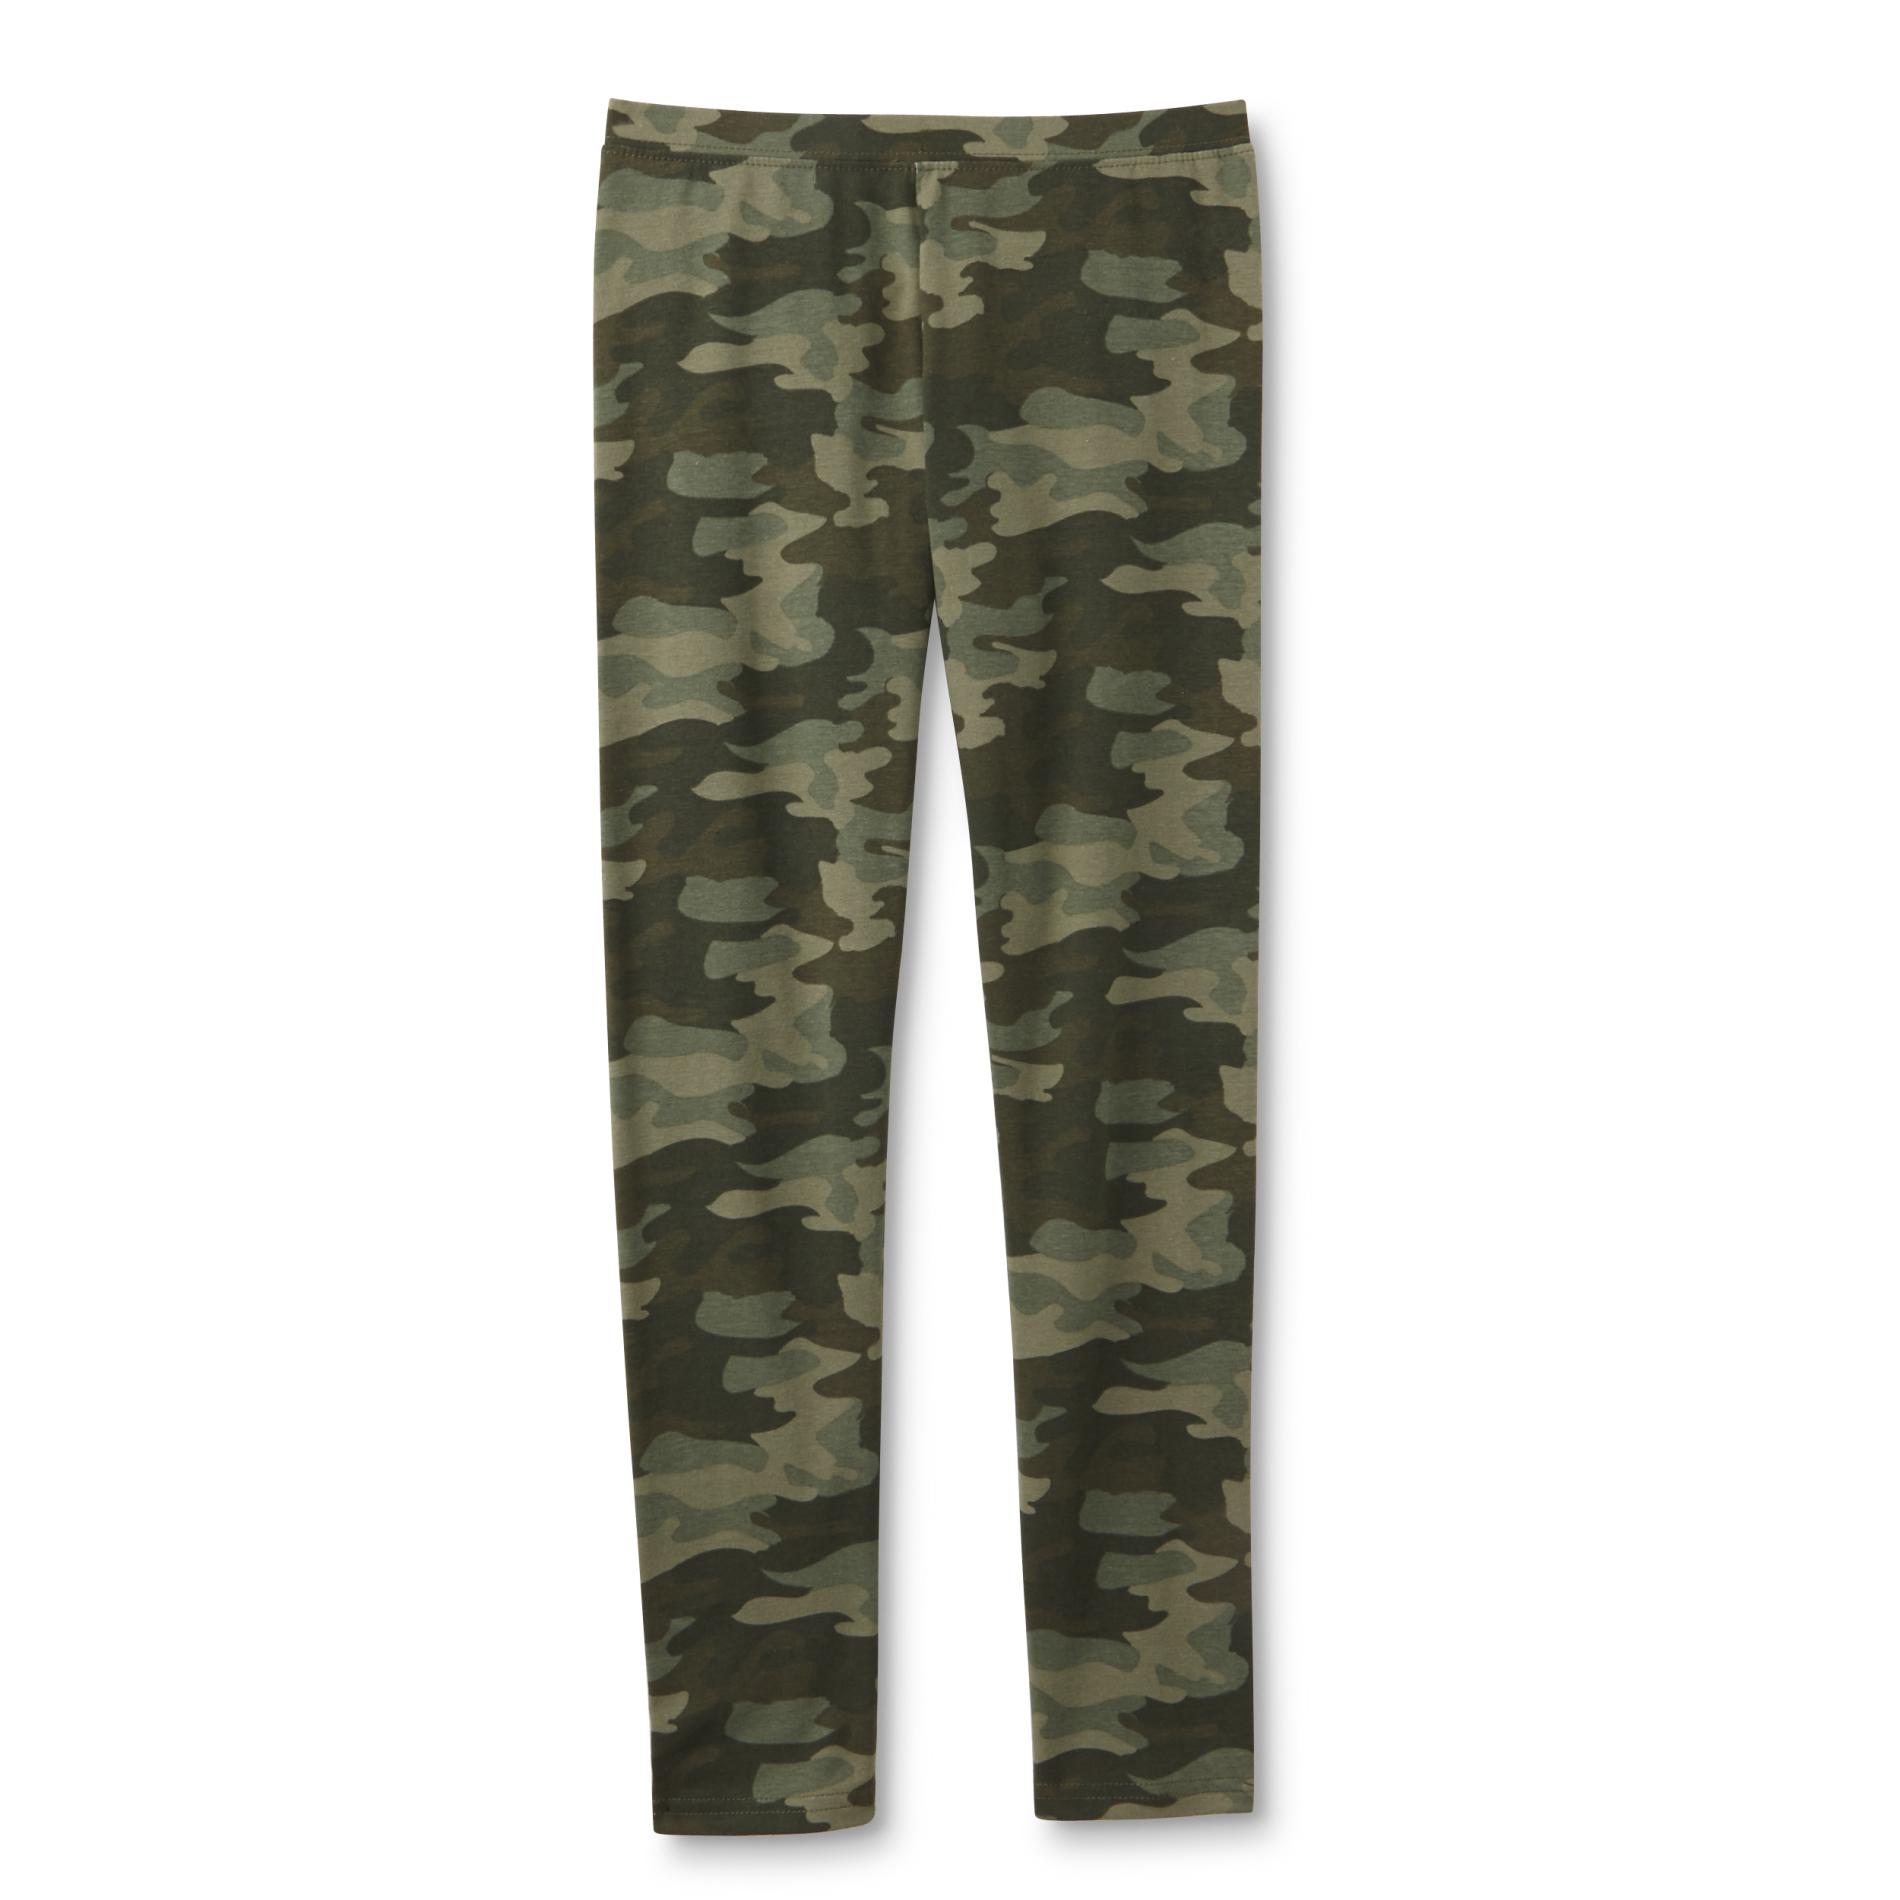 Simply Styled Girls' Printed Leggings - Camouflage